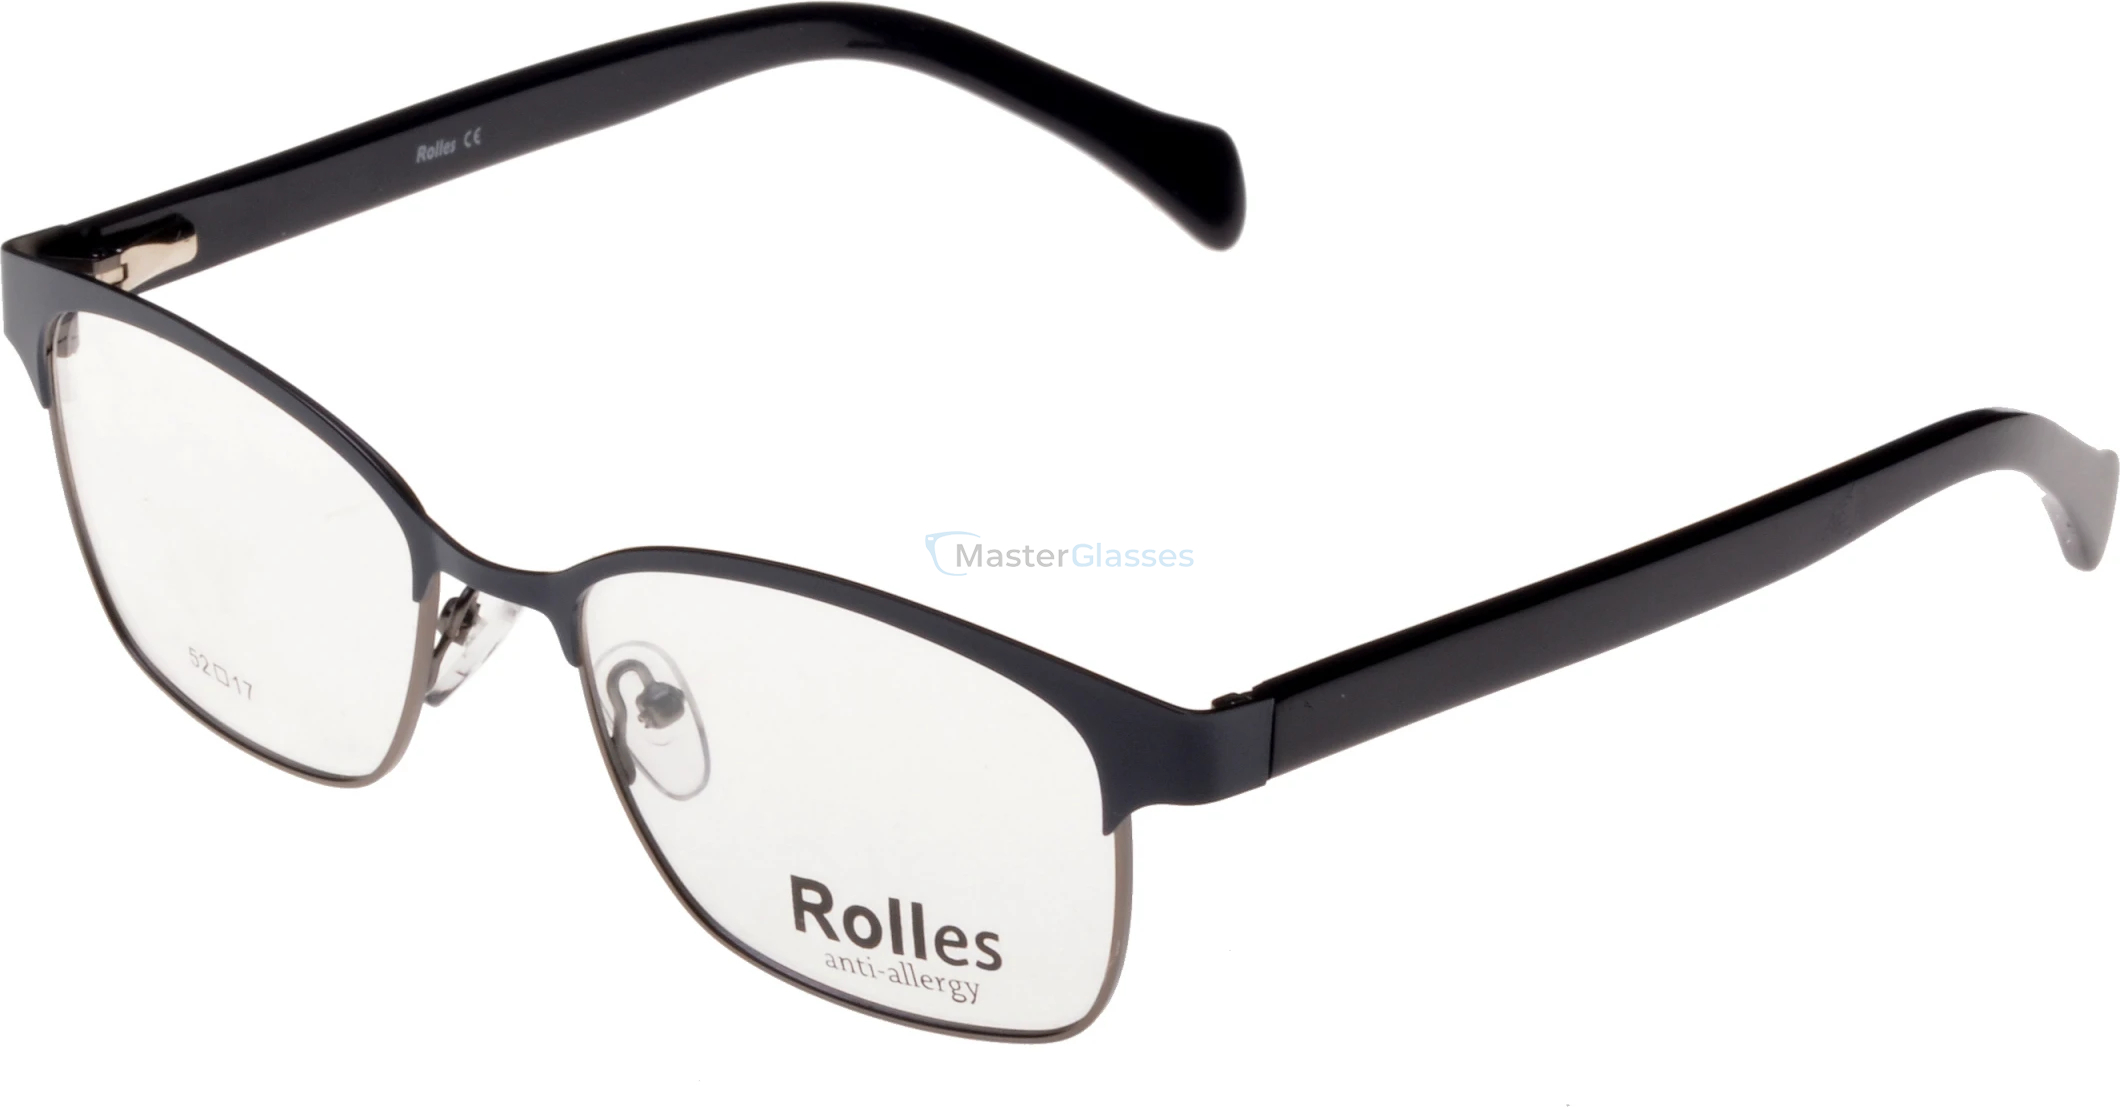  Rolles 463 02